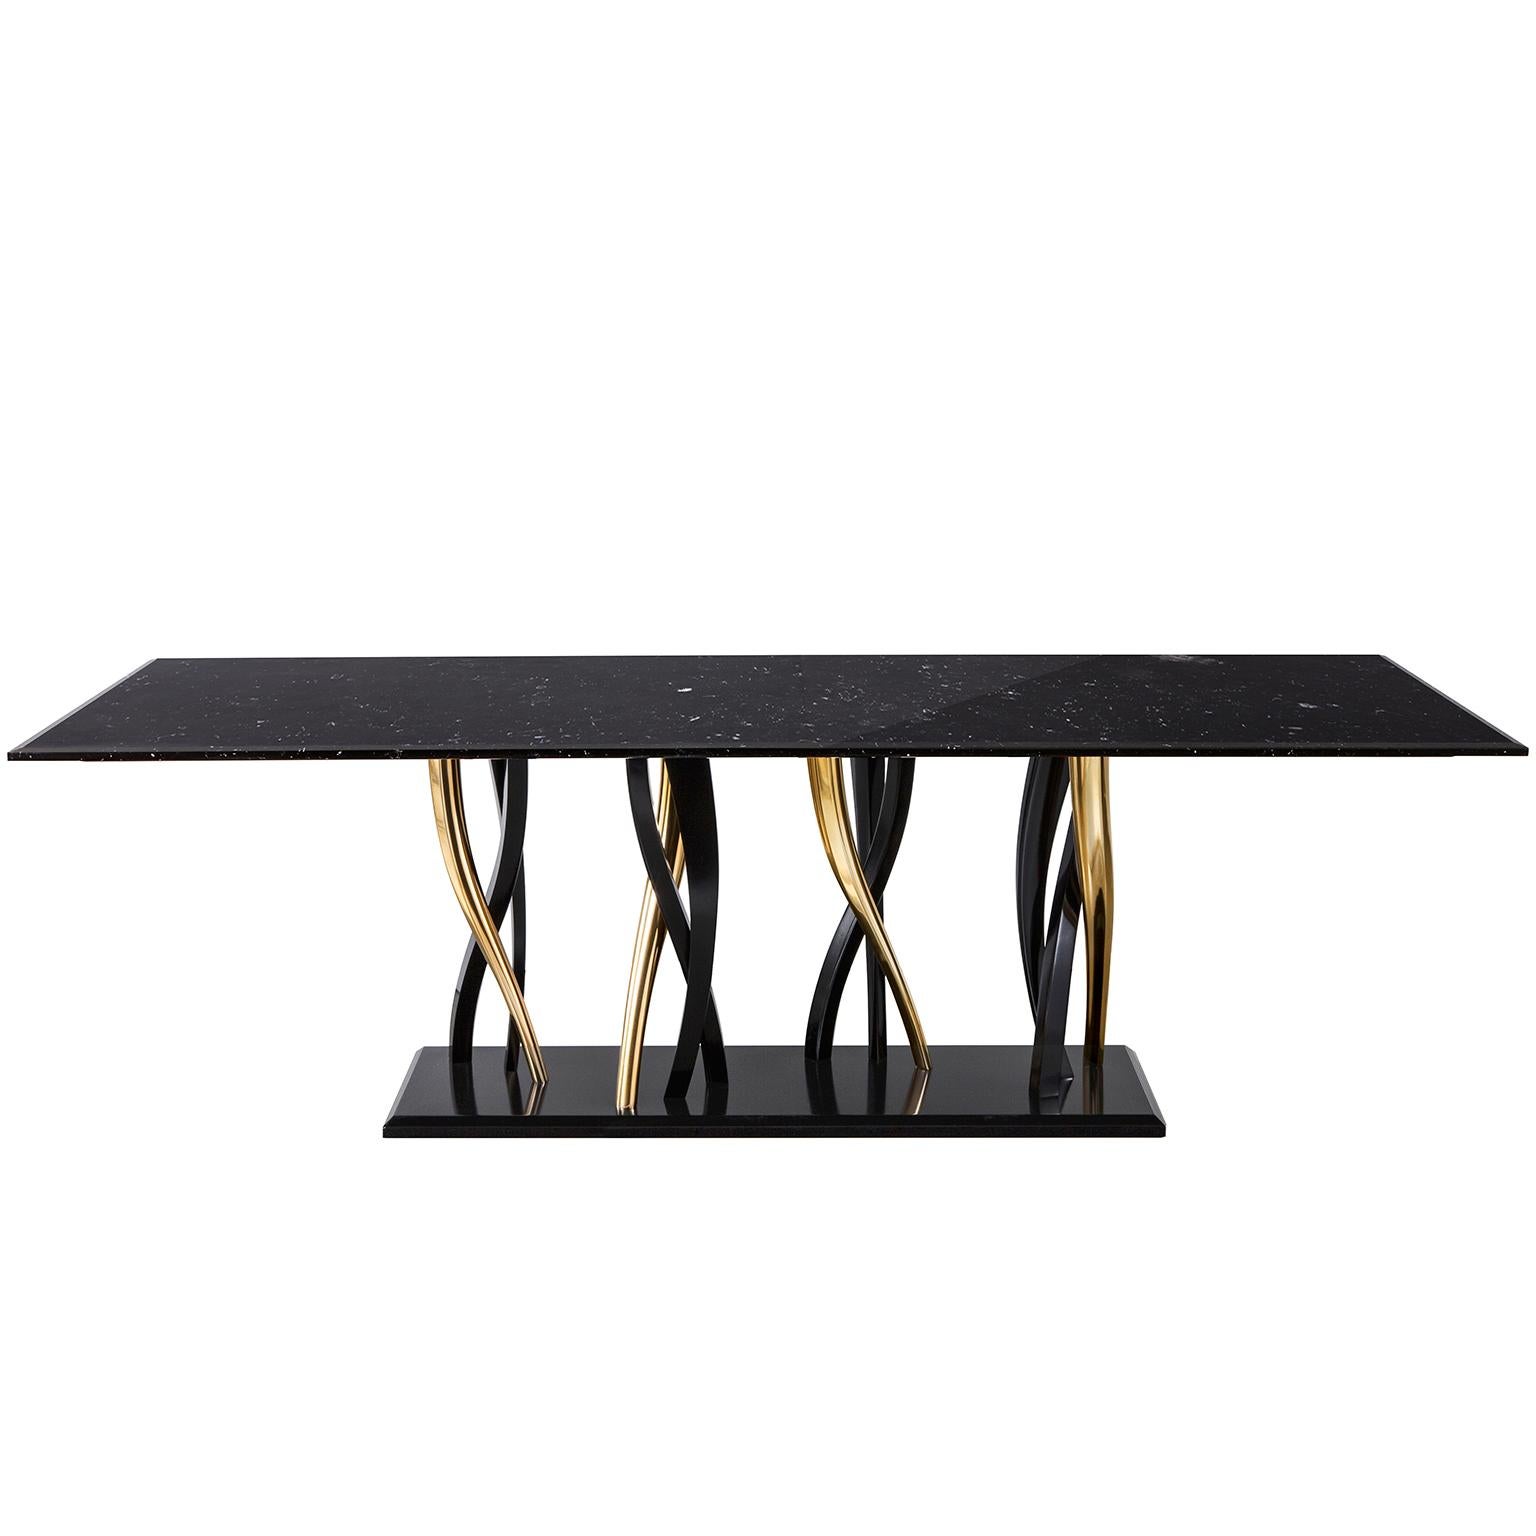 "Il Pezzo 8 Marble Table" dining table in Marquinia marble - black and gold base For Sale